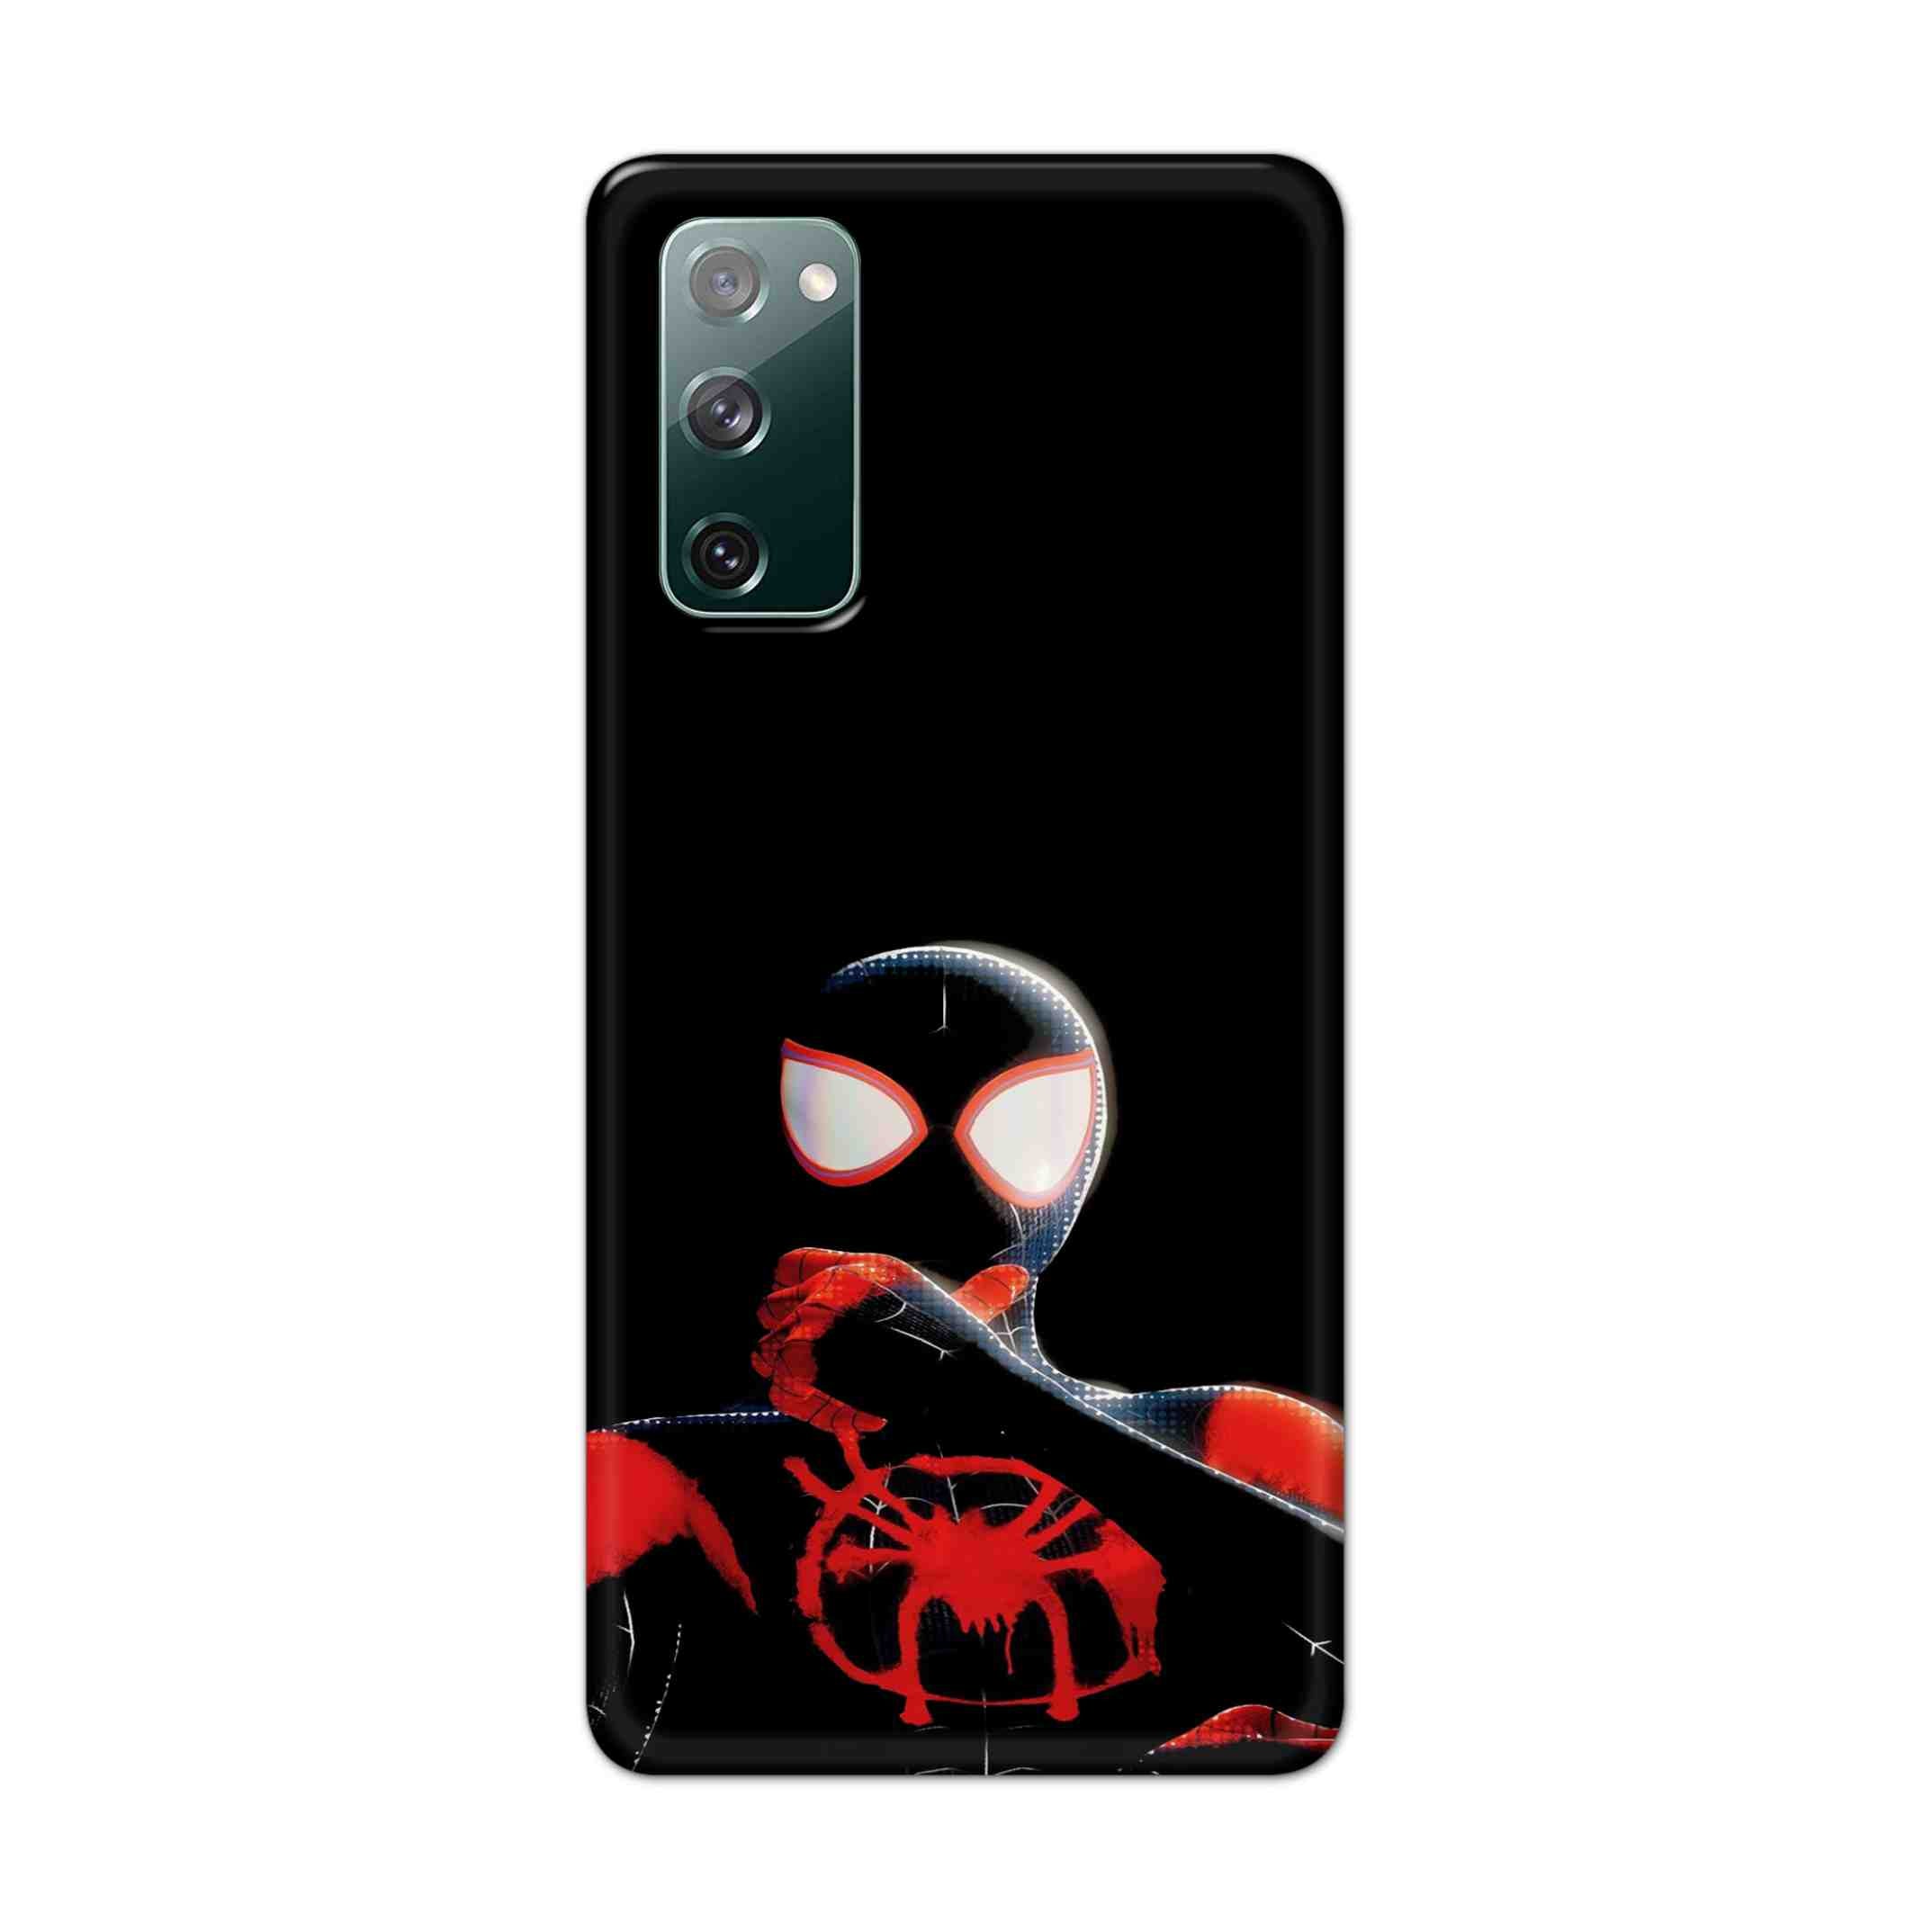 Buy Black Spiderman Hard Back Mobile Phone Case Cover For Samsung Galaxy S20 FE Online